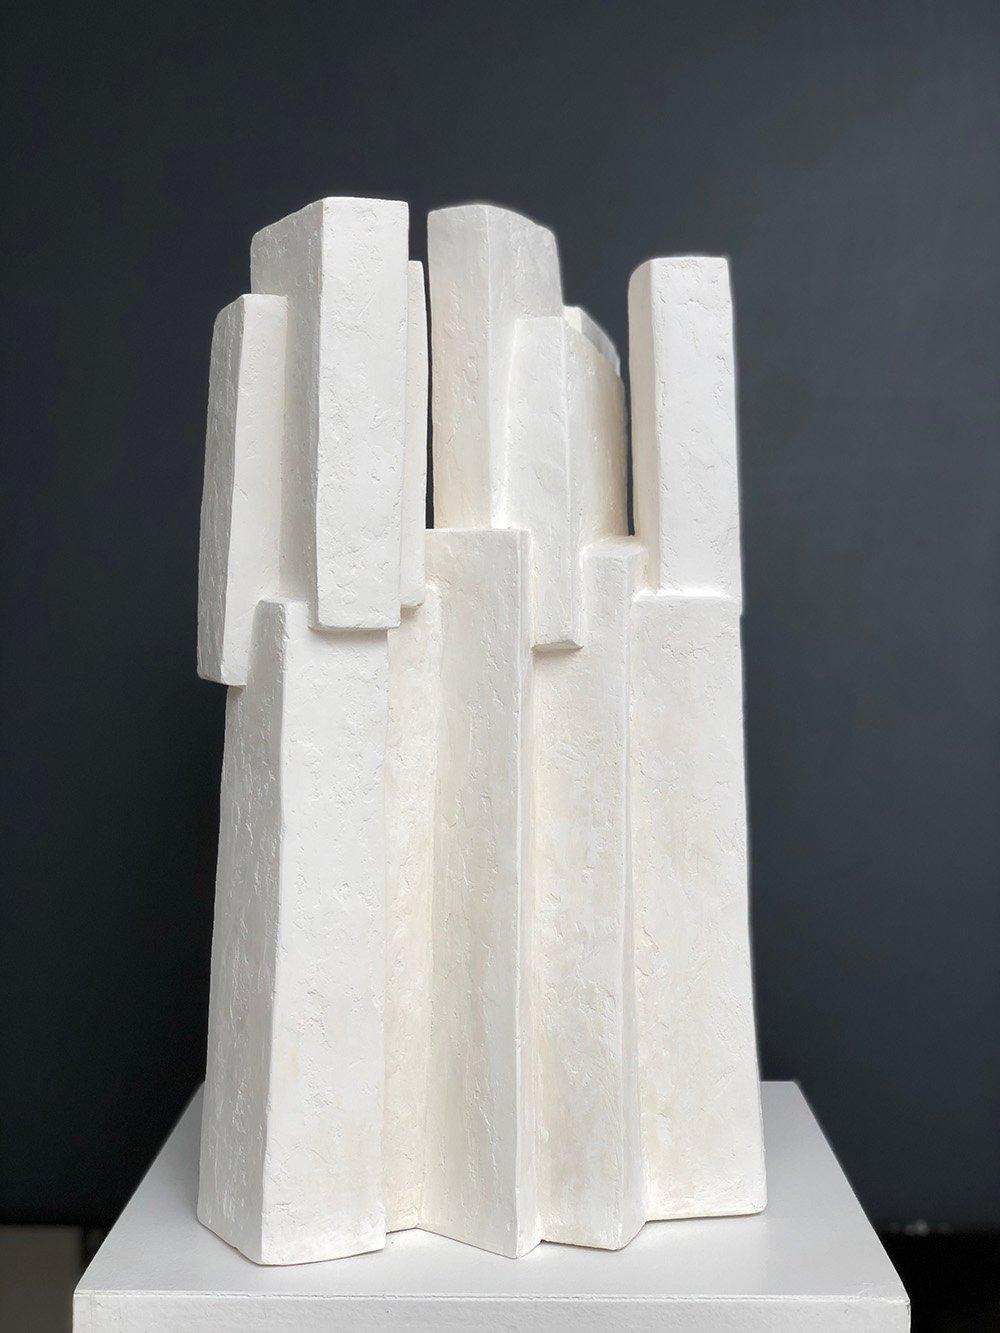 Ensemble III (2020), sculpture by French contemporary artist Delphine Brabant. 
Resin sculpture, edition of 8 + 4 A.P., 45 cm × 25 cm × 22 cm.

Fascinated with the concept of construction, Delphine Brabant composes her abstract sculptures like an